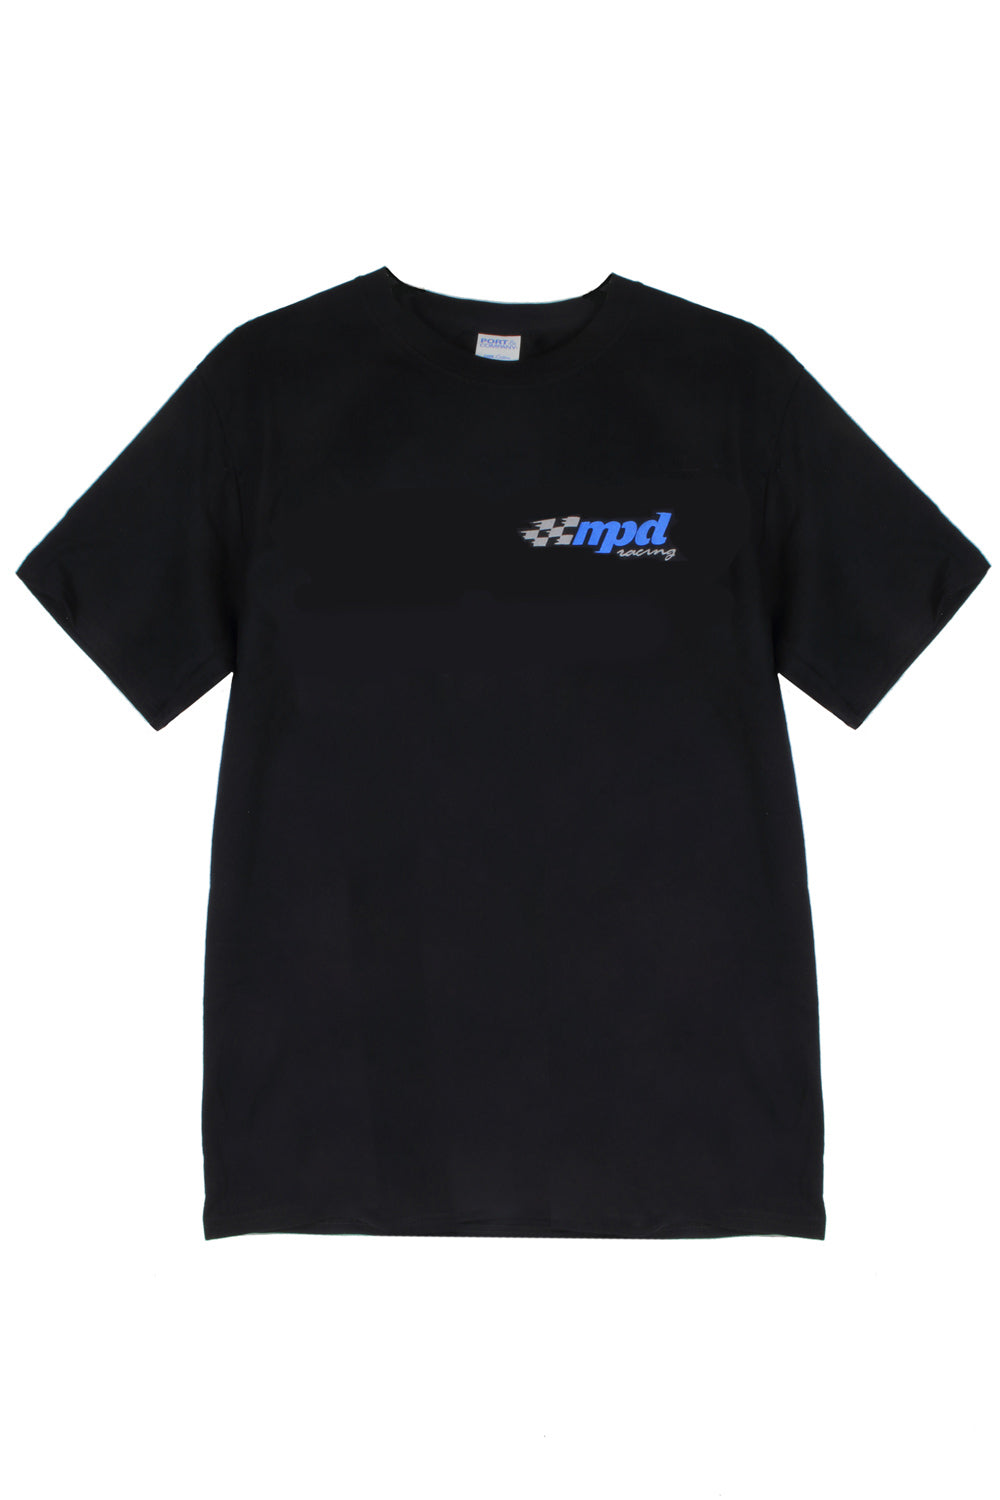 MPD Softstyle Tee Shirt XX-Large